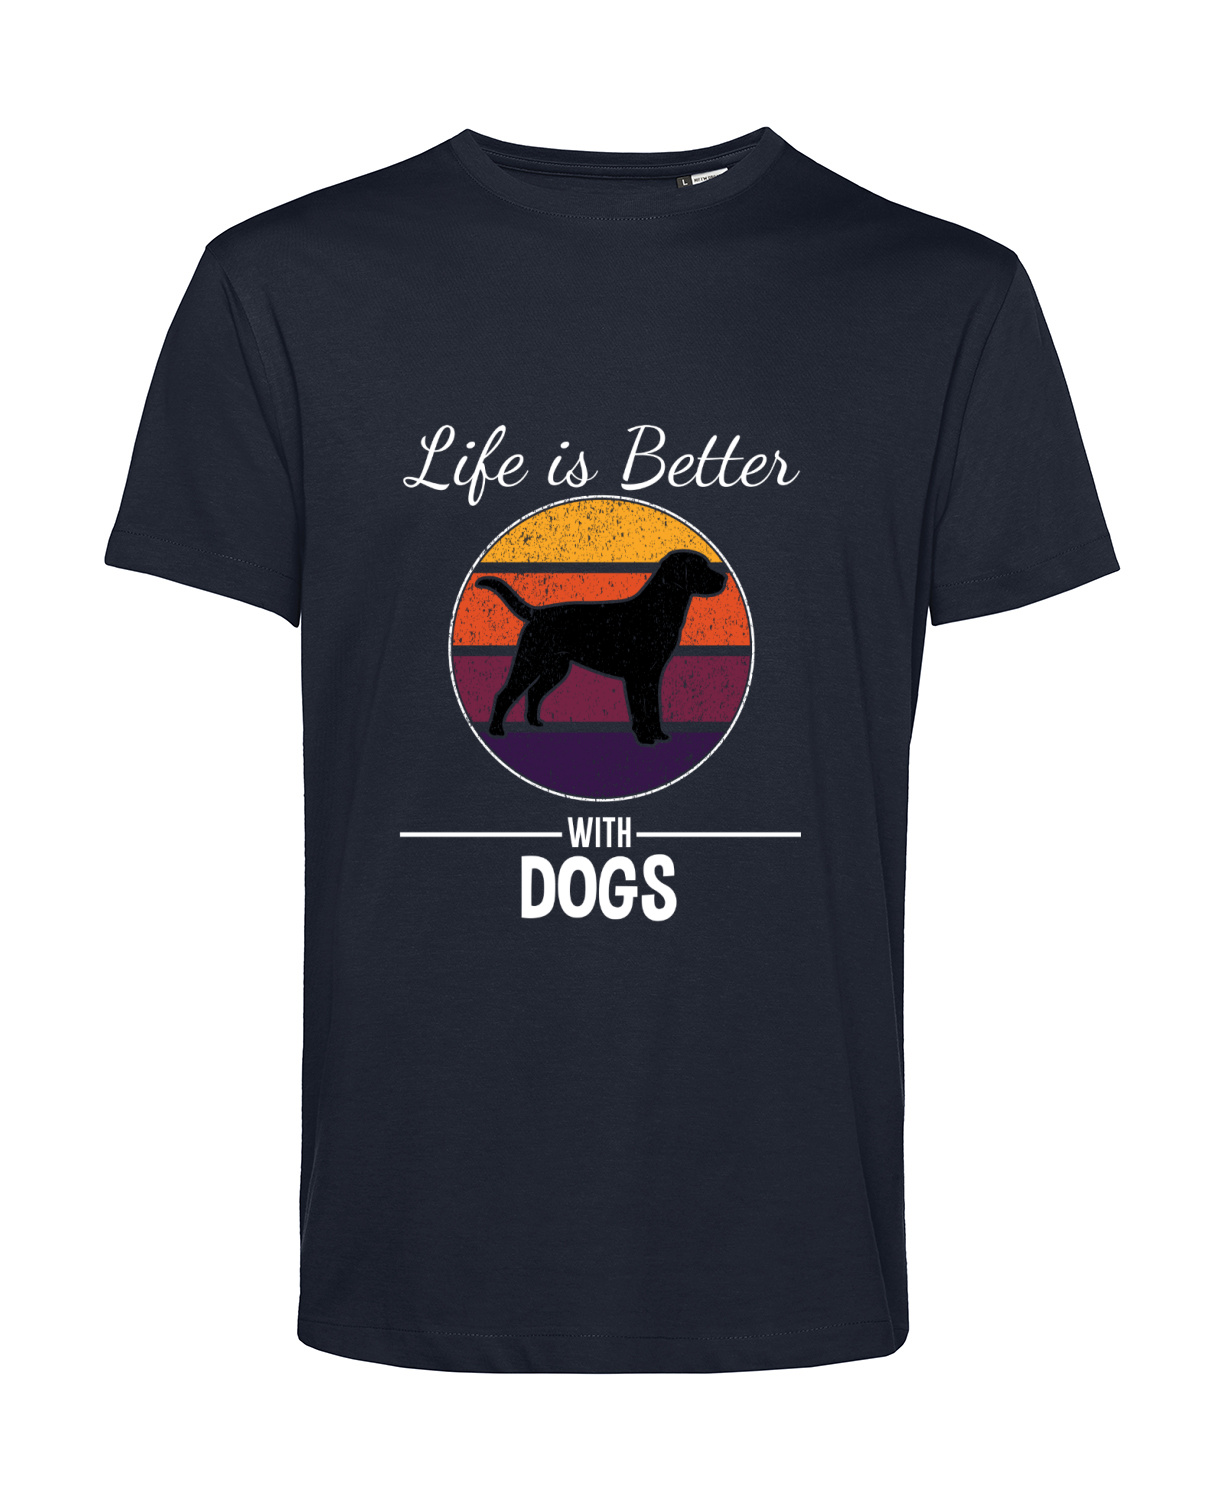 Nachhaltiges T-Shirt Herren Hunde - Life is Better with Dogs